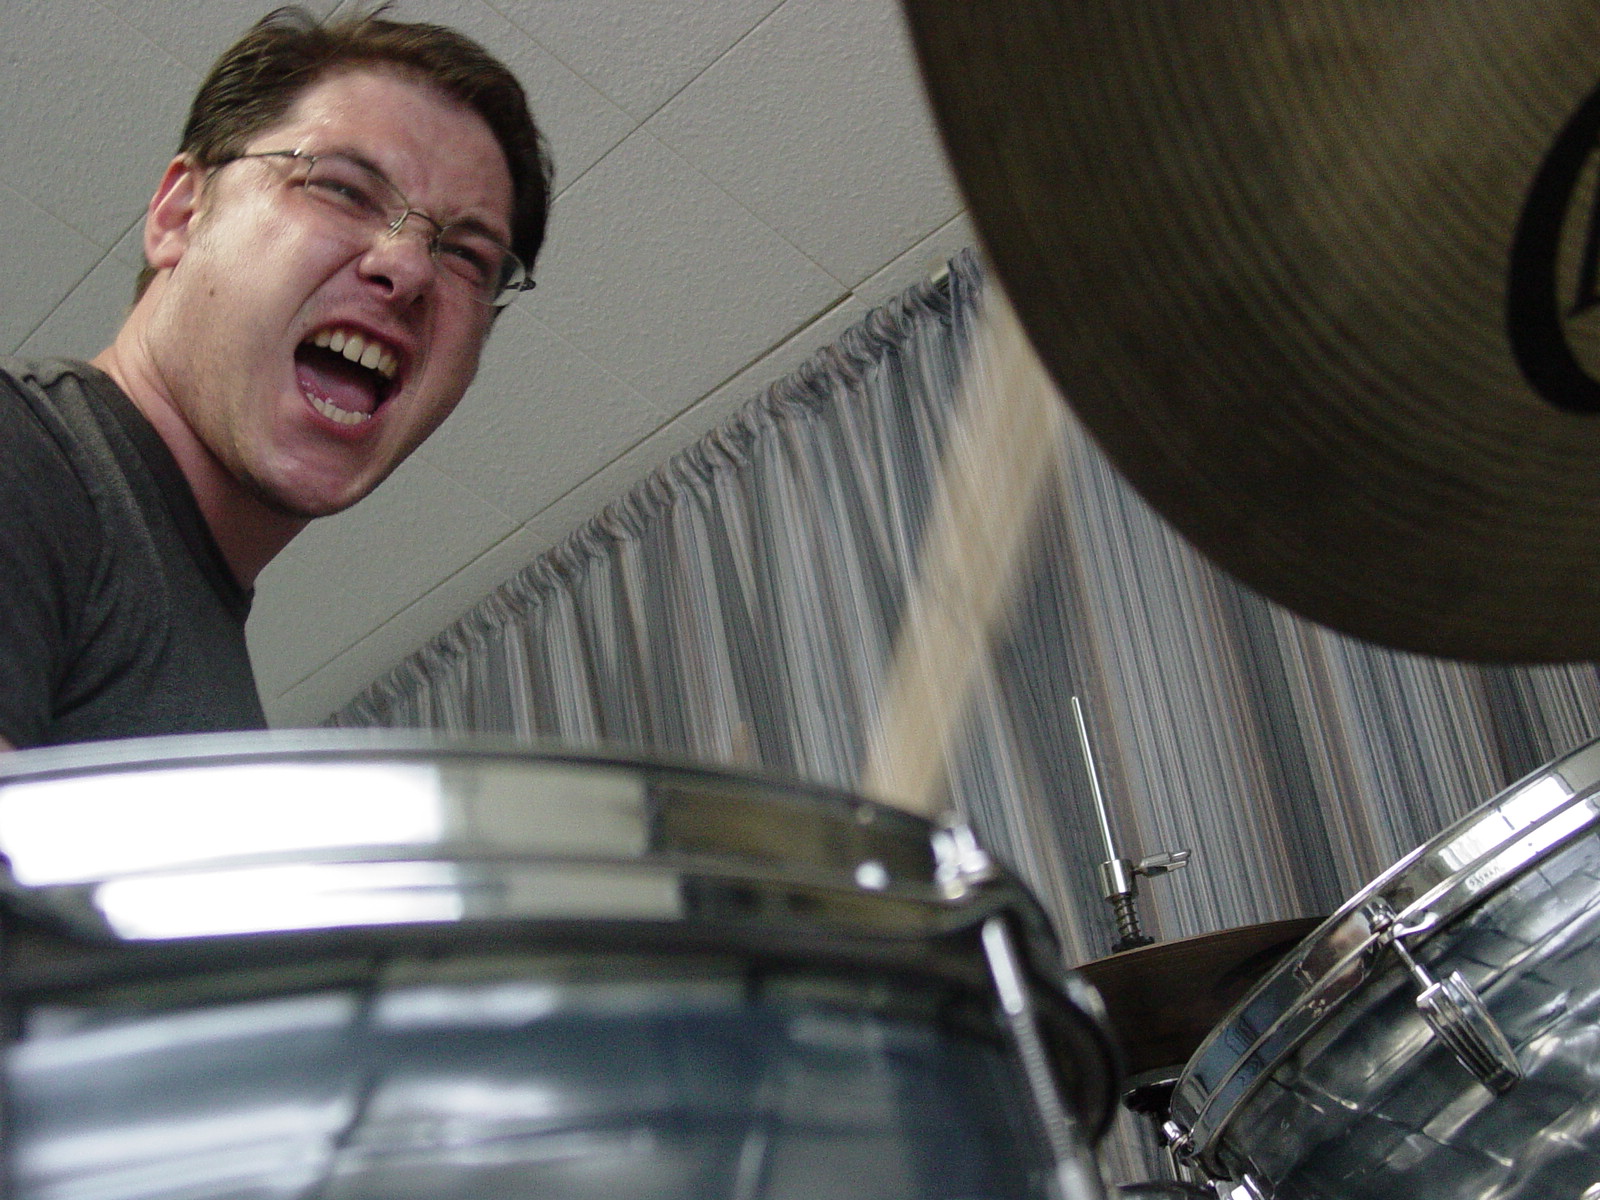 PHOTO:  Chris Crothers on the drums!